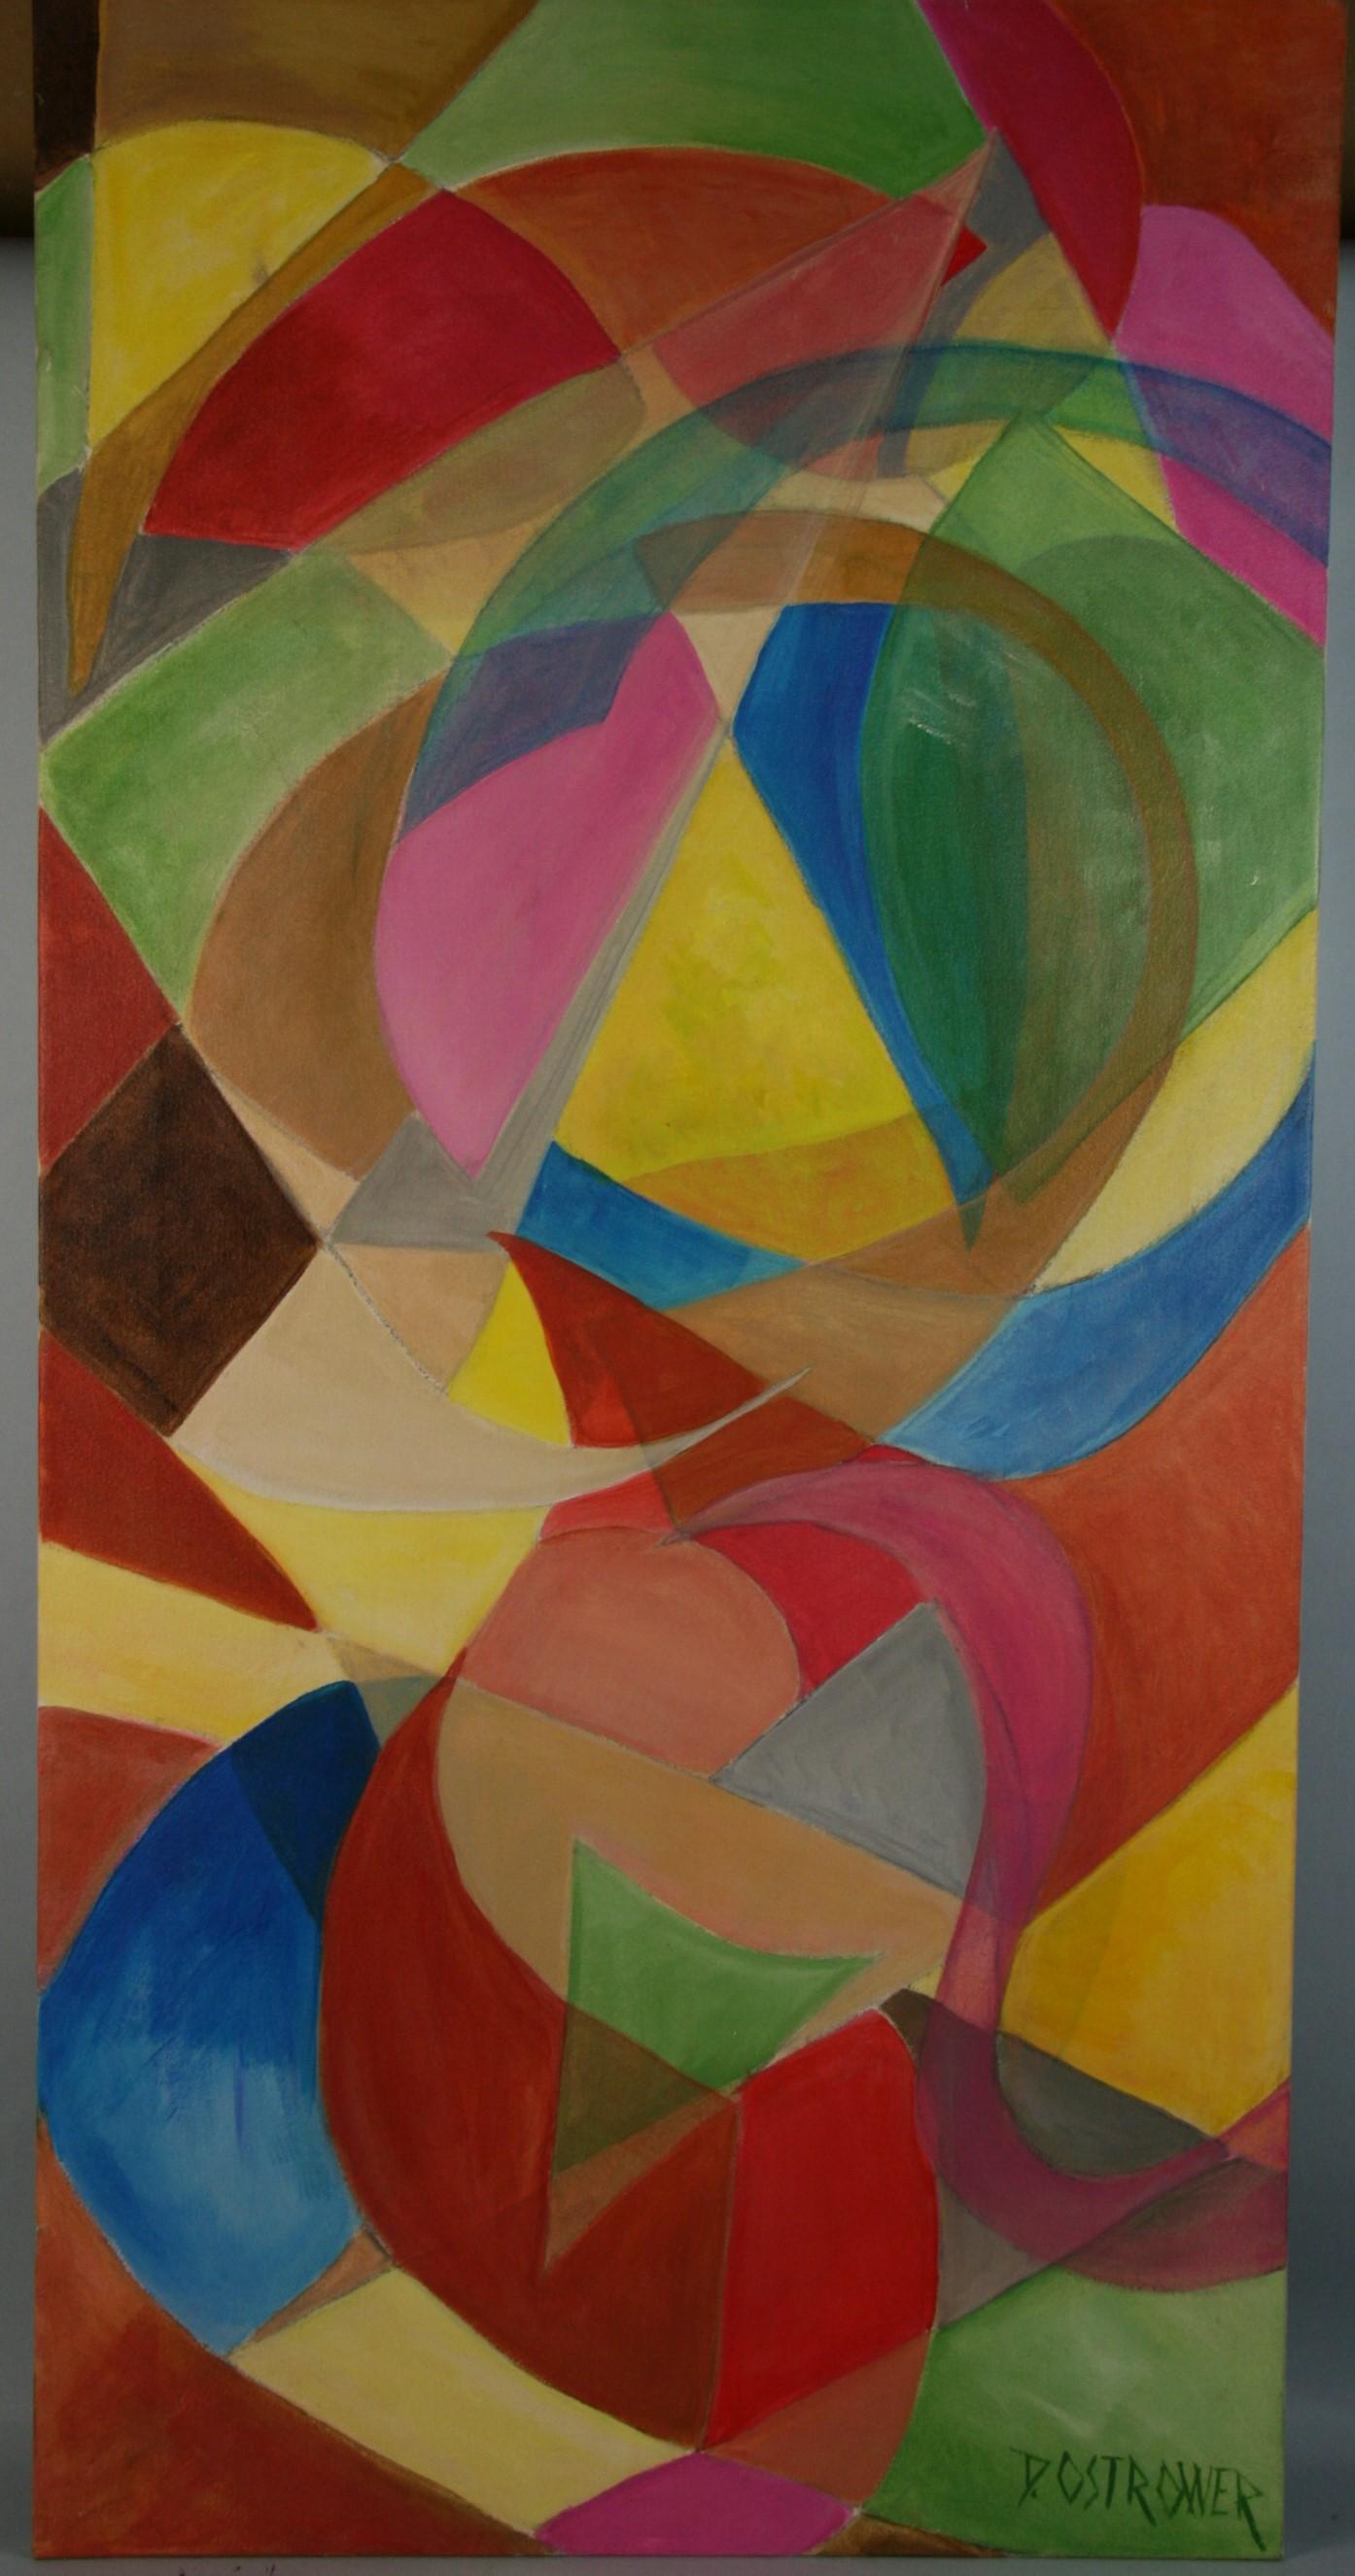 D.Ostrower Abstract Painting - Oversized Colorful Geometric Abstract Midcentury